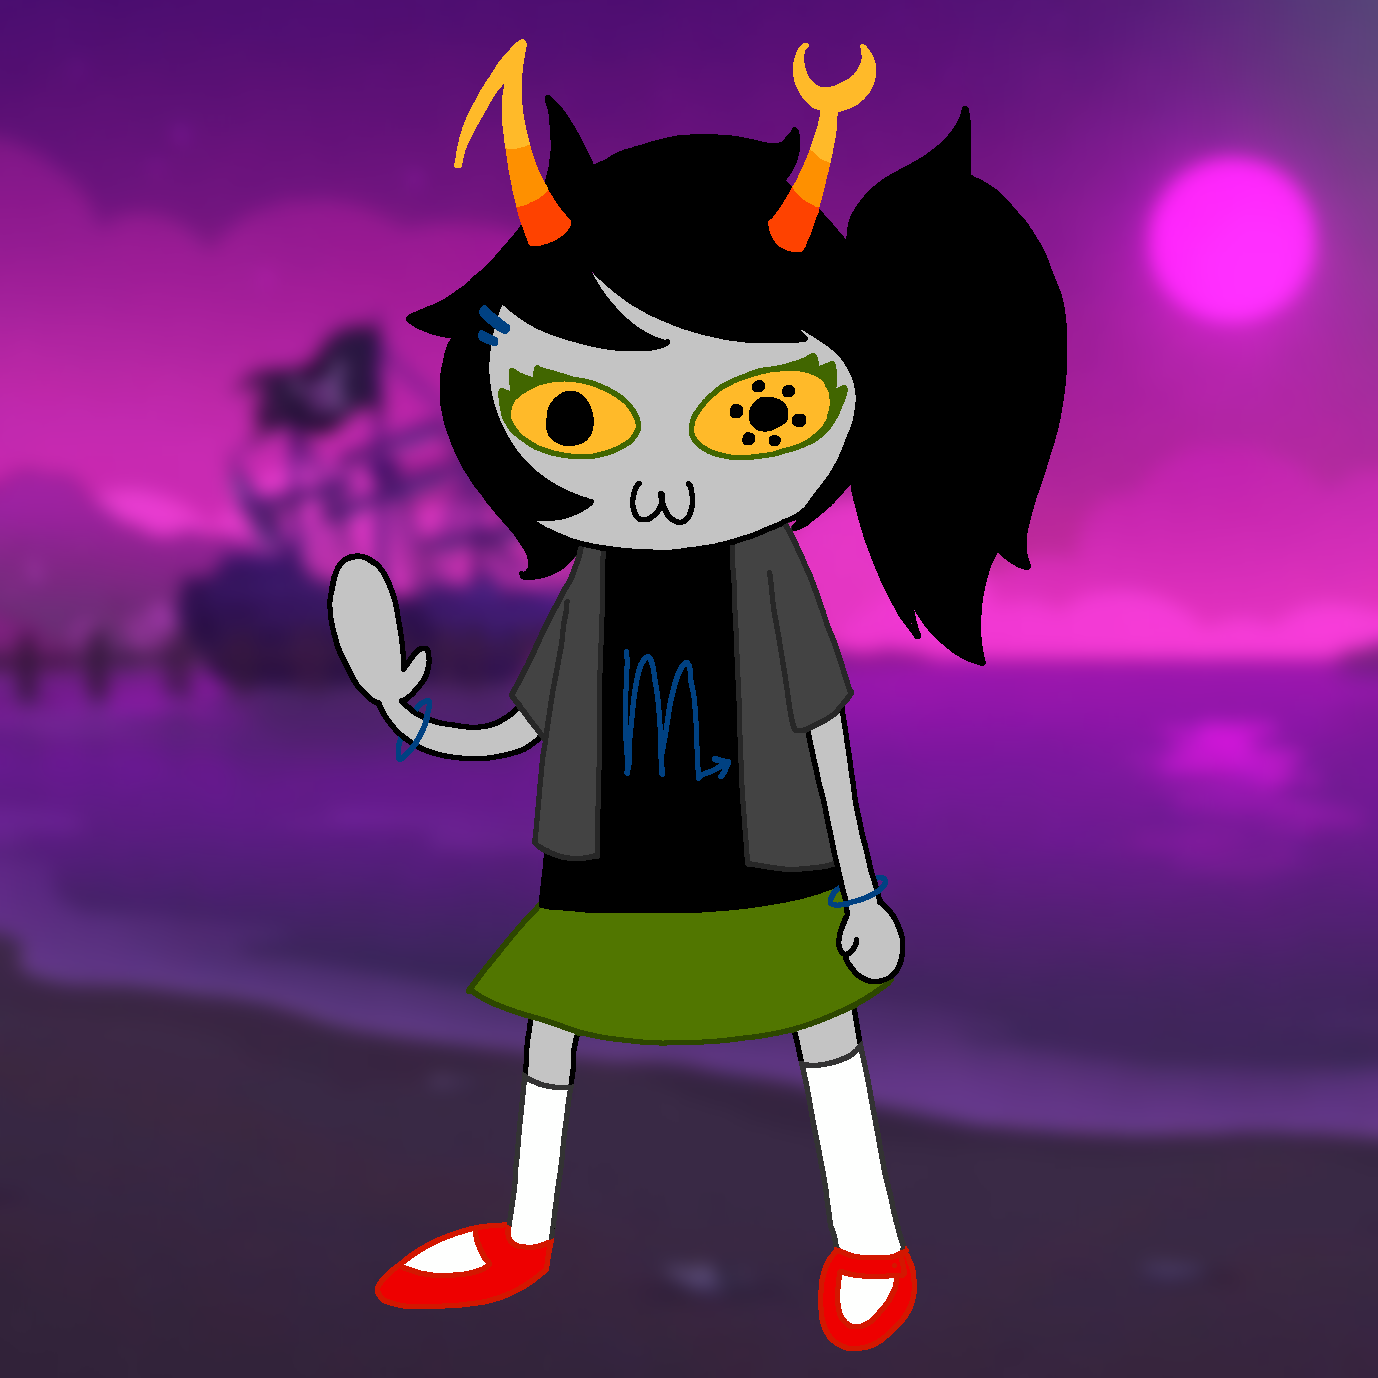 A bad drawing of a Homestuck troll, she resembles Vriska but she is wearing a shorter jacket, a green skirt, a ponytail, white stockings with red mary janes, green eyeliner, blue barettes, and a blue bracelet. She has a cat-like smile. She still has the same horn shape, pupils, and shirt symbol as regular Vriska.